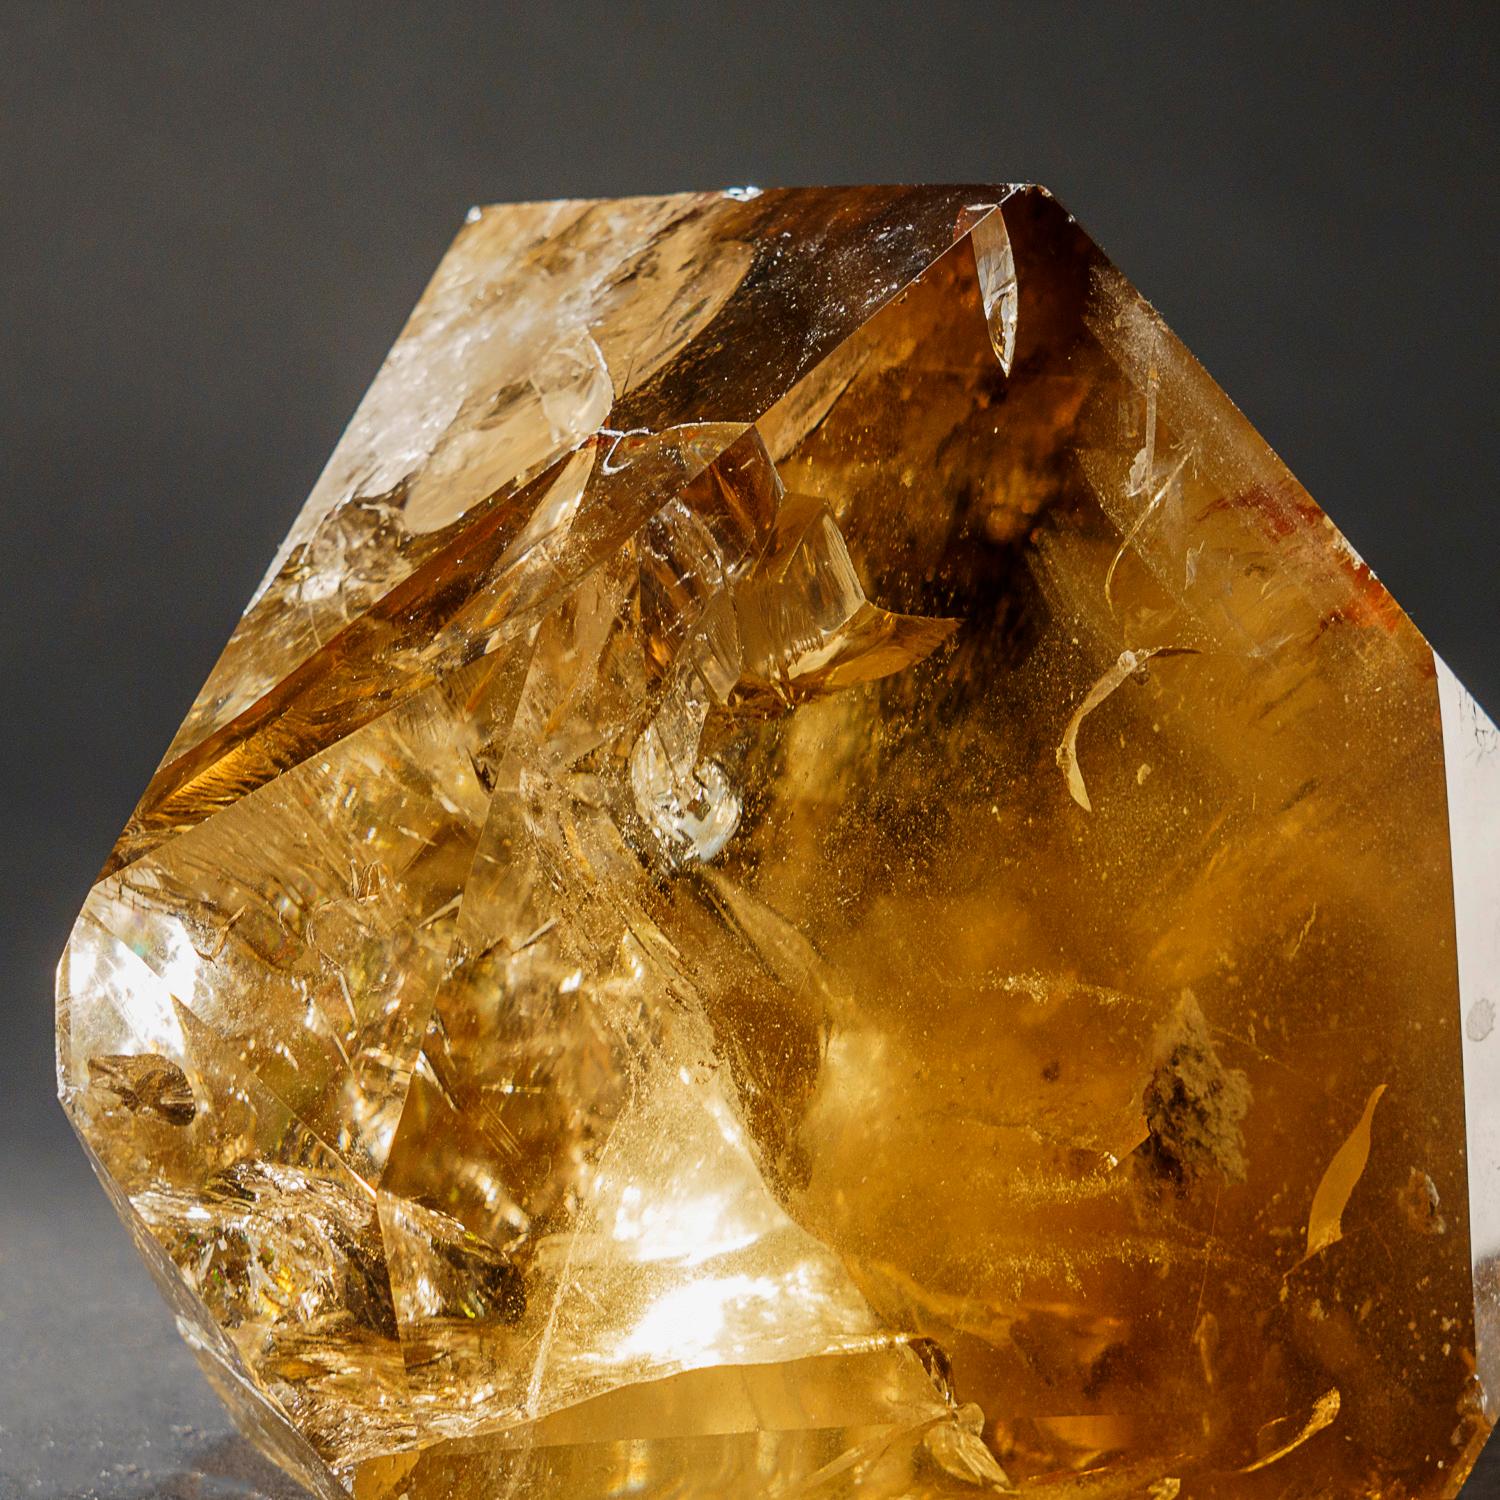 Museum-quality, large crystal of transparent Smoky Quartz point with perfectly terminated face. This world-class crystal point is internally flawless, with top luster and excellent natural smoky yellow color.

Smokey Quartz works with all of the